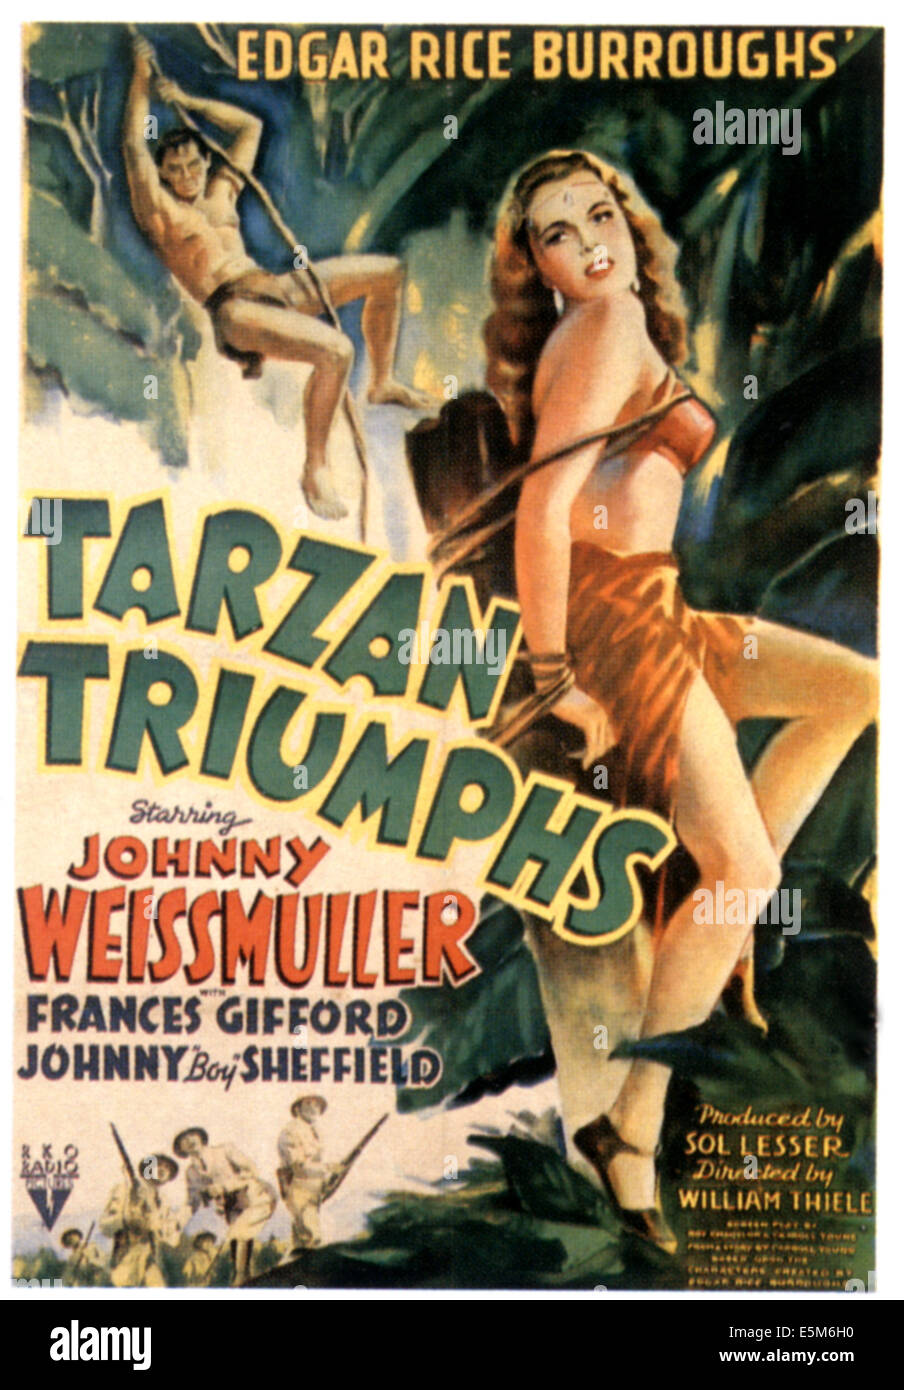 Triomphes Tarzan, Johnny Weissmuller, Frances Gifford, 1943 Banque D'Images